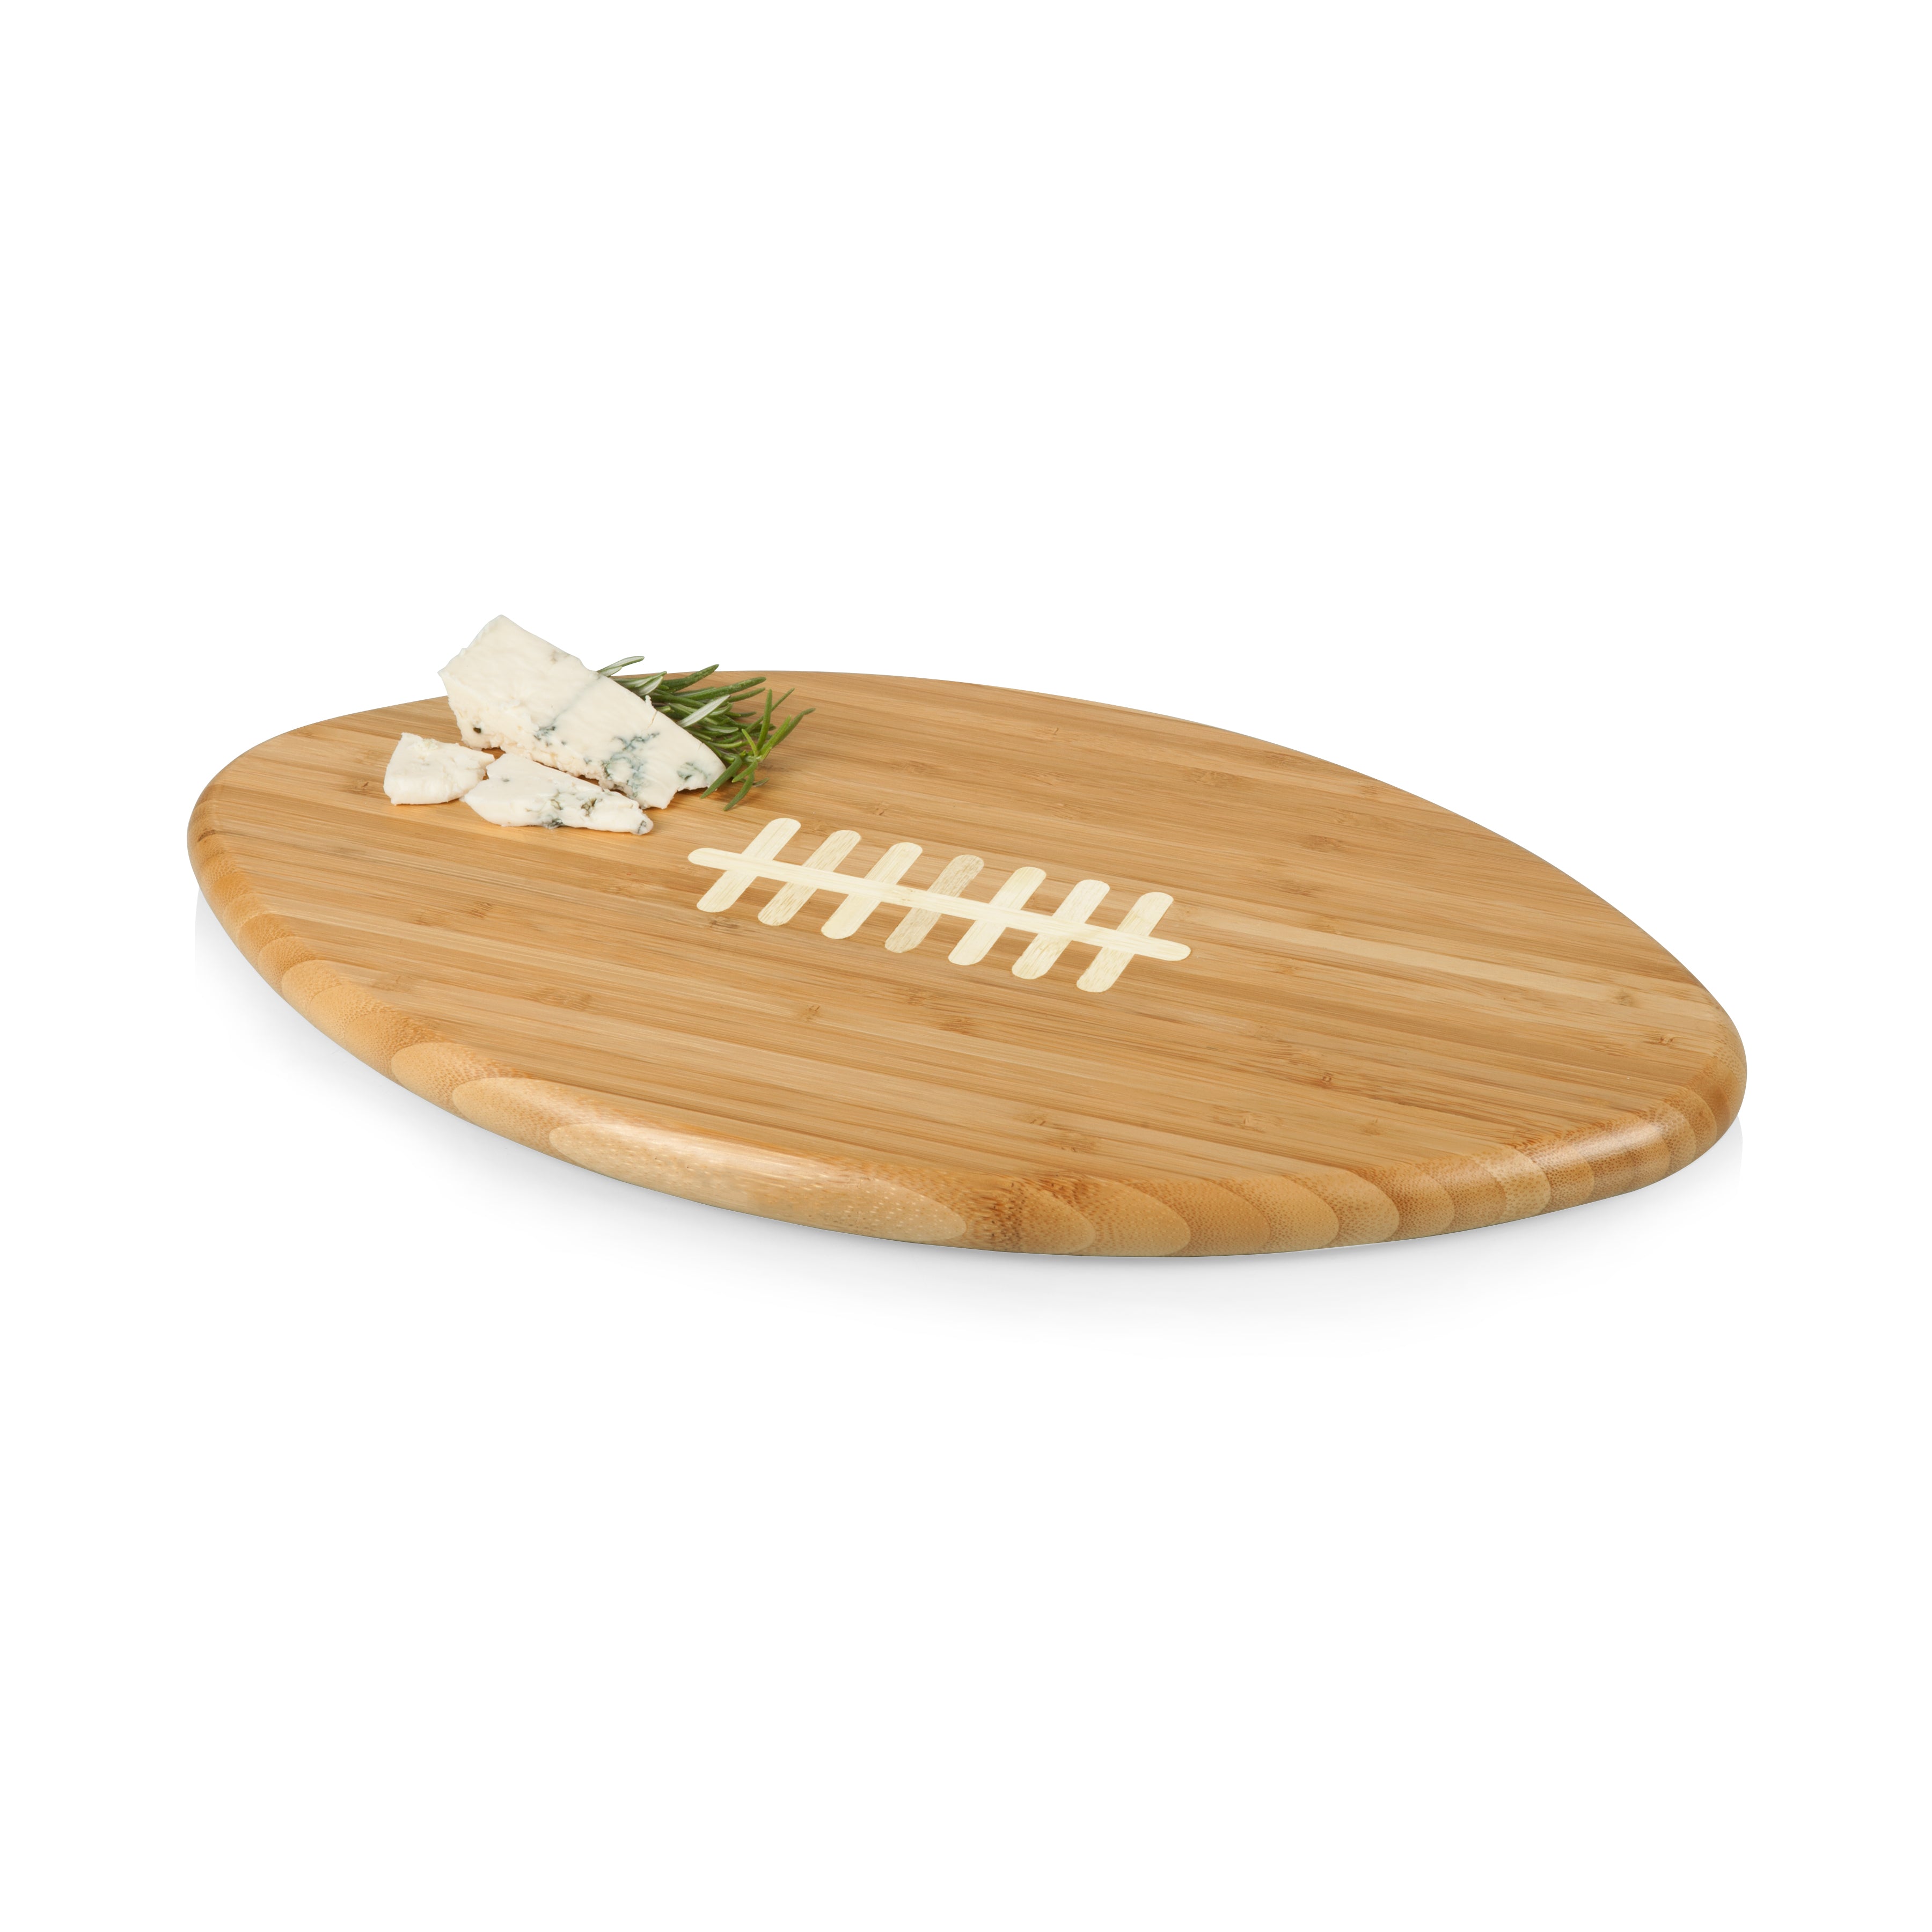 Touchdown! Pro Football Cutting Board & Serving Tray